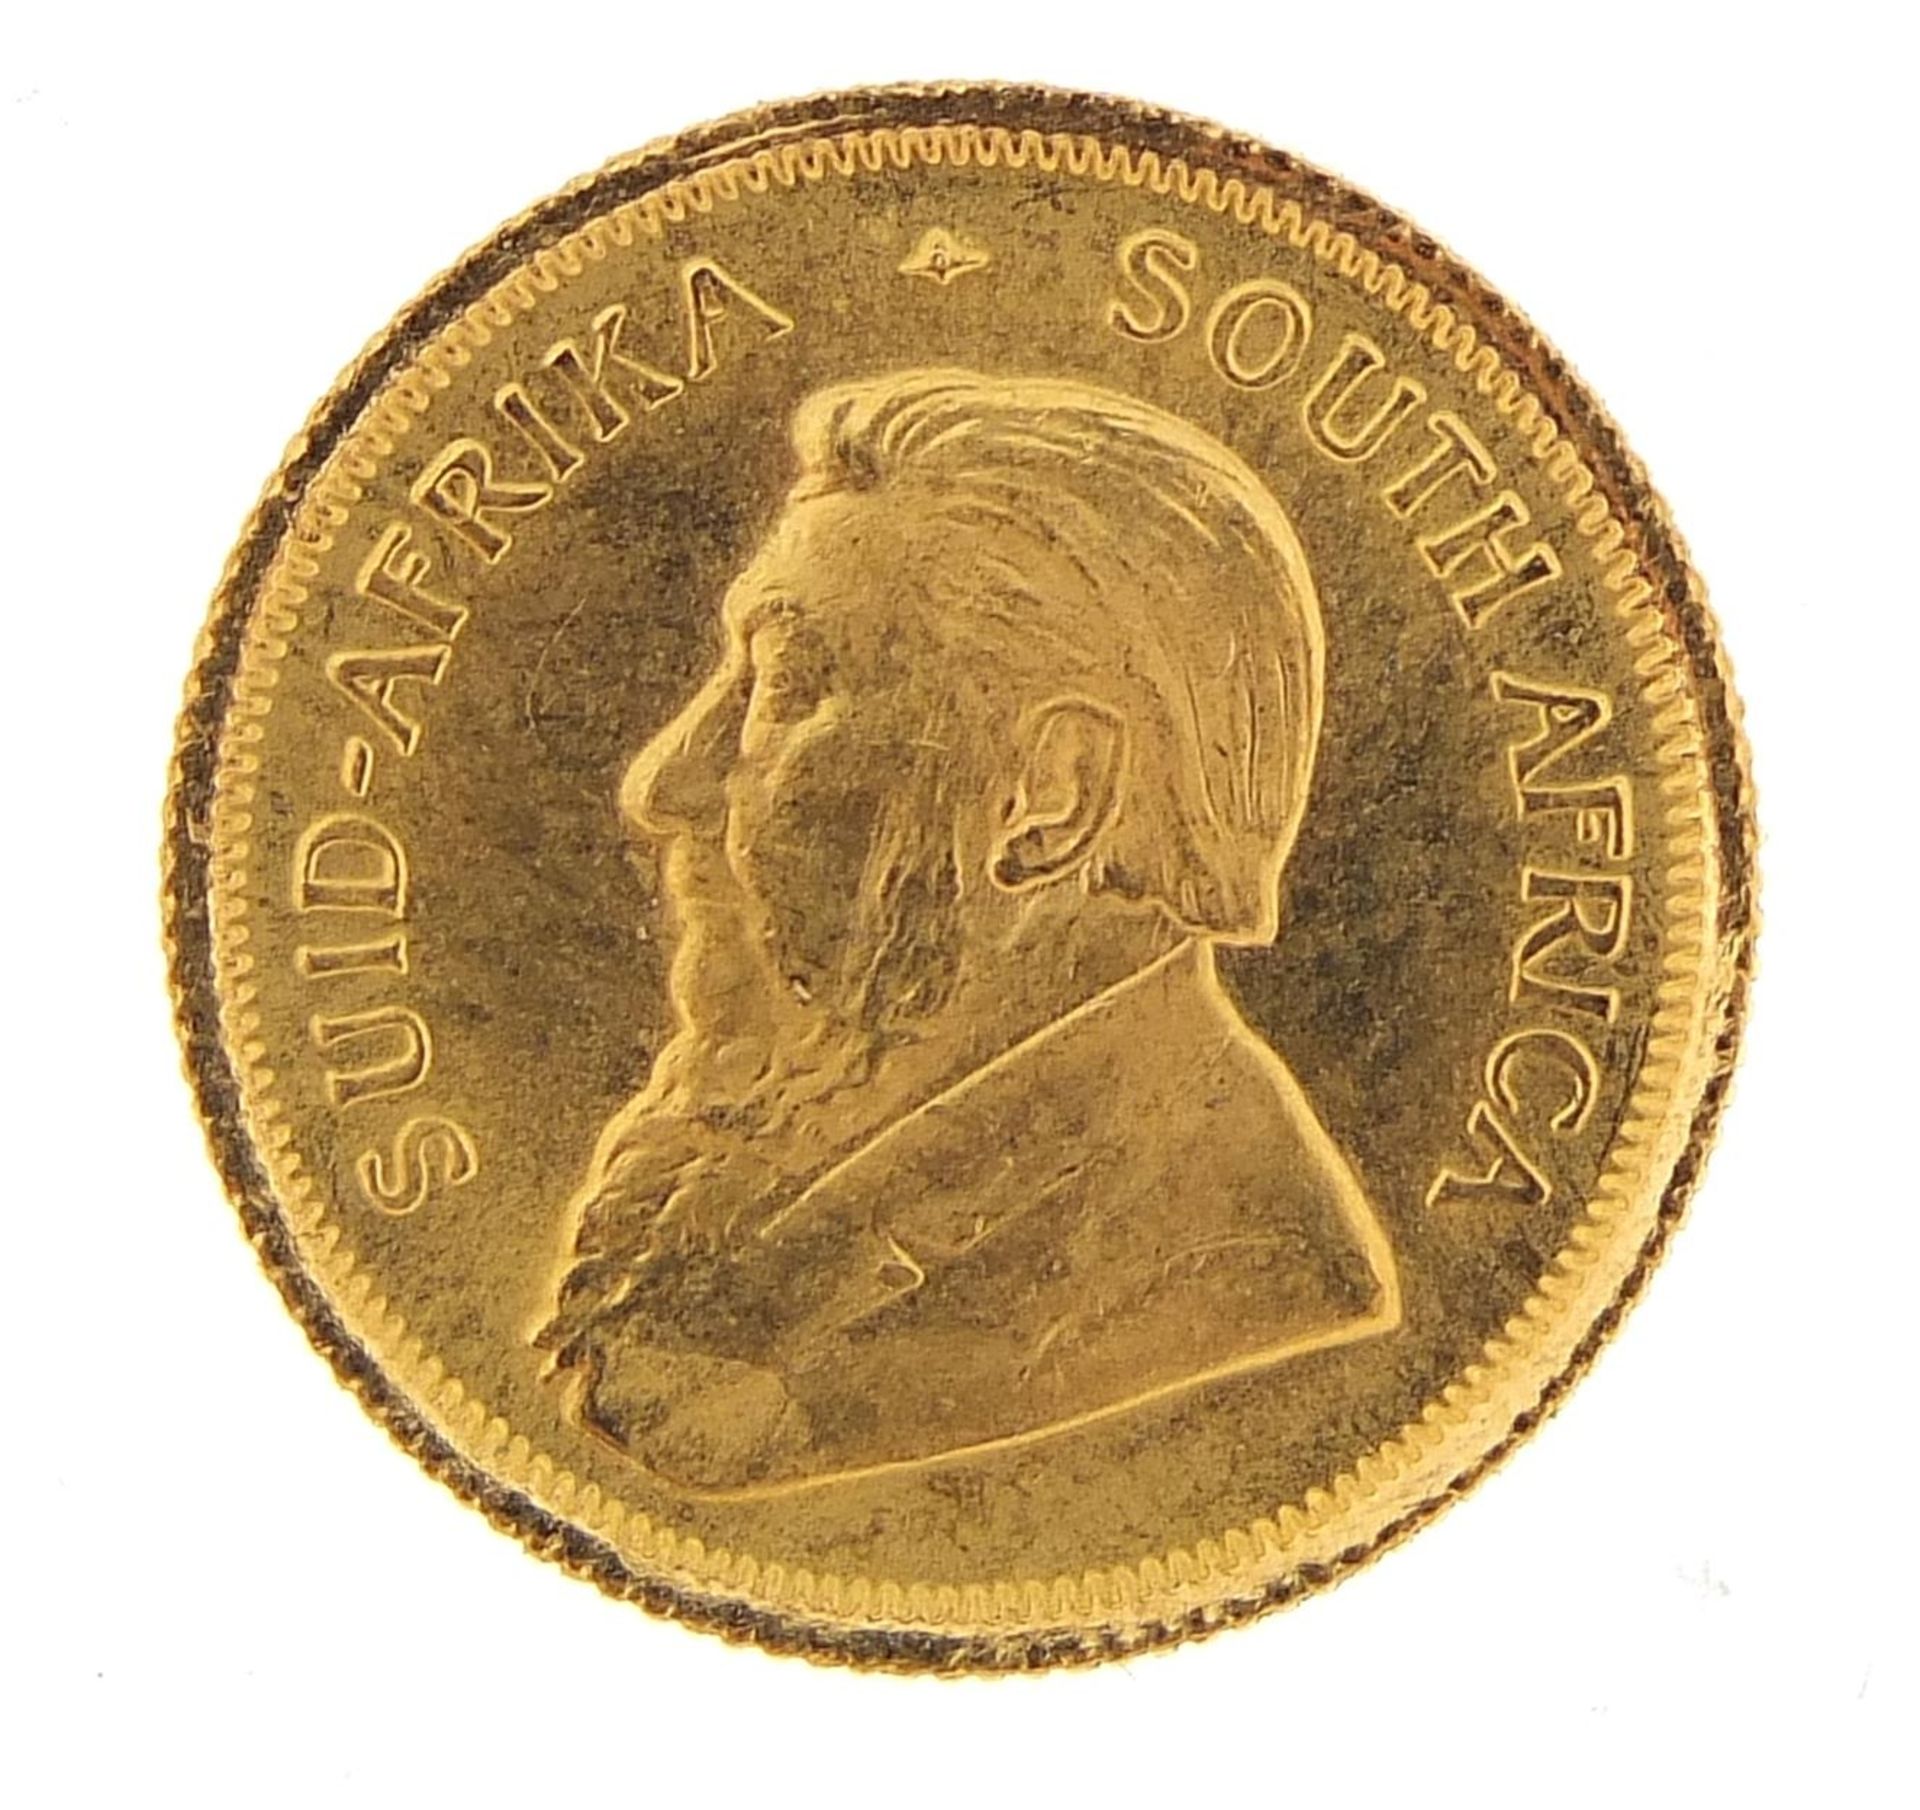 South African 1980 one tenth gold krugerrand - this lot is sold without buyer?s premium, the - Image 2 of 3